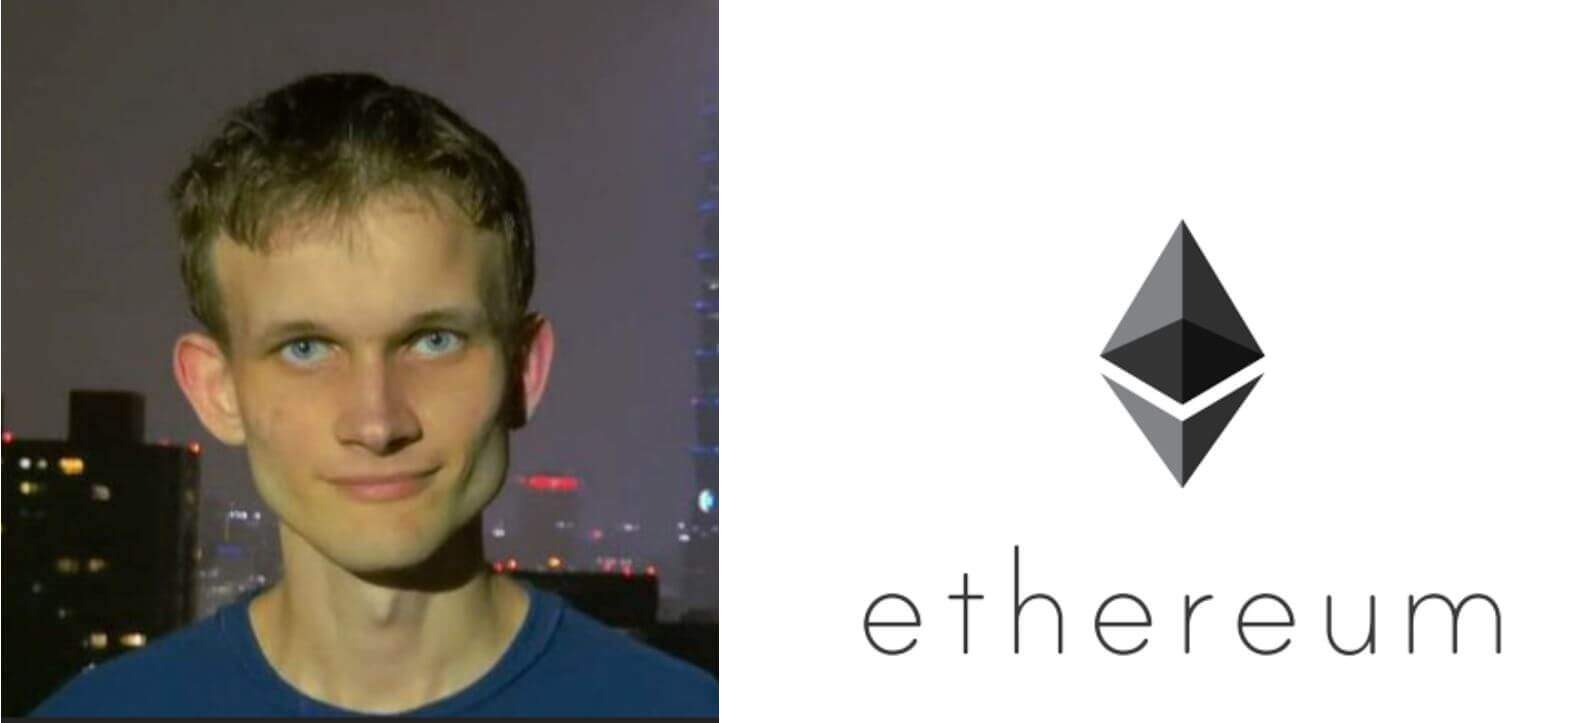 who owns most ethereum